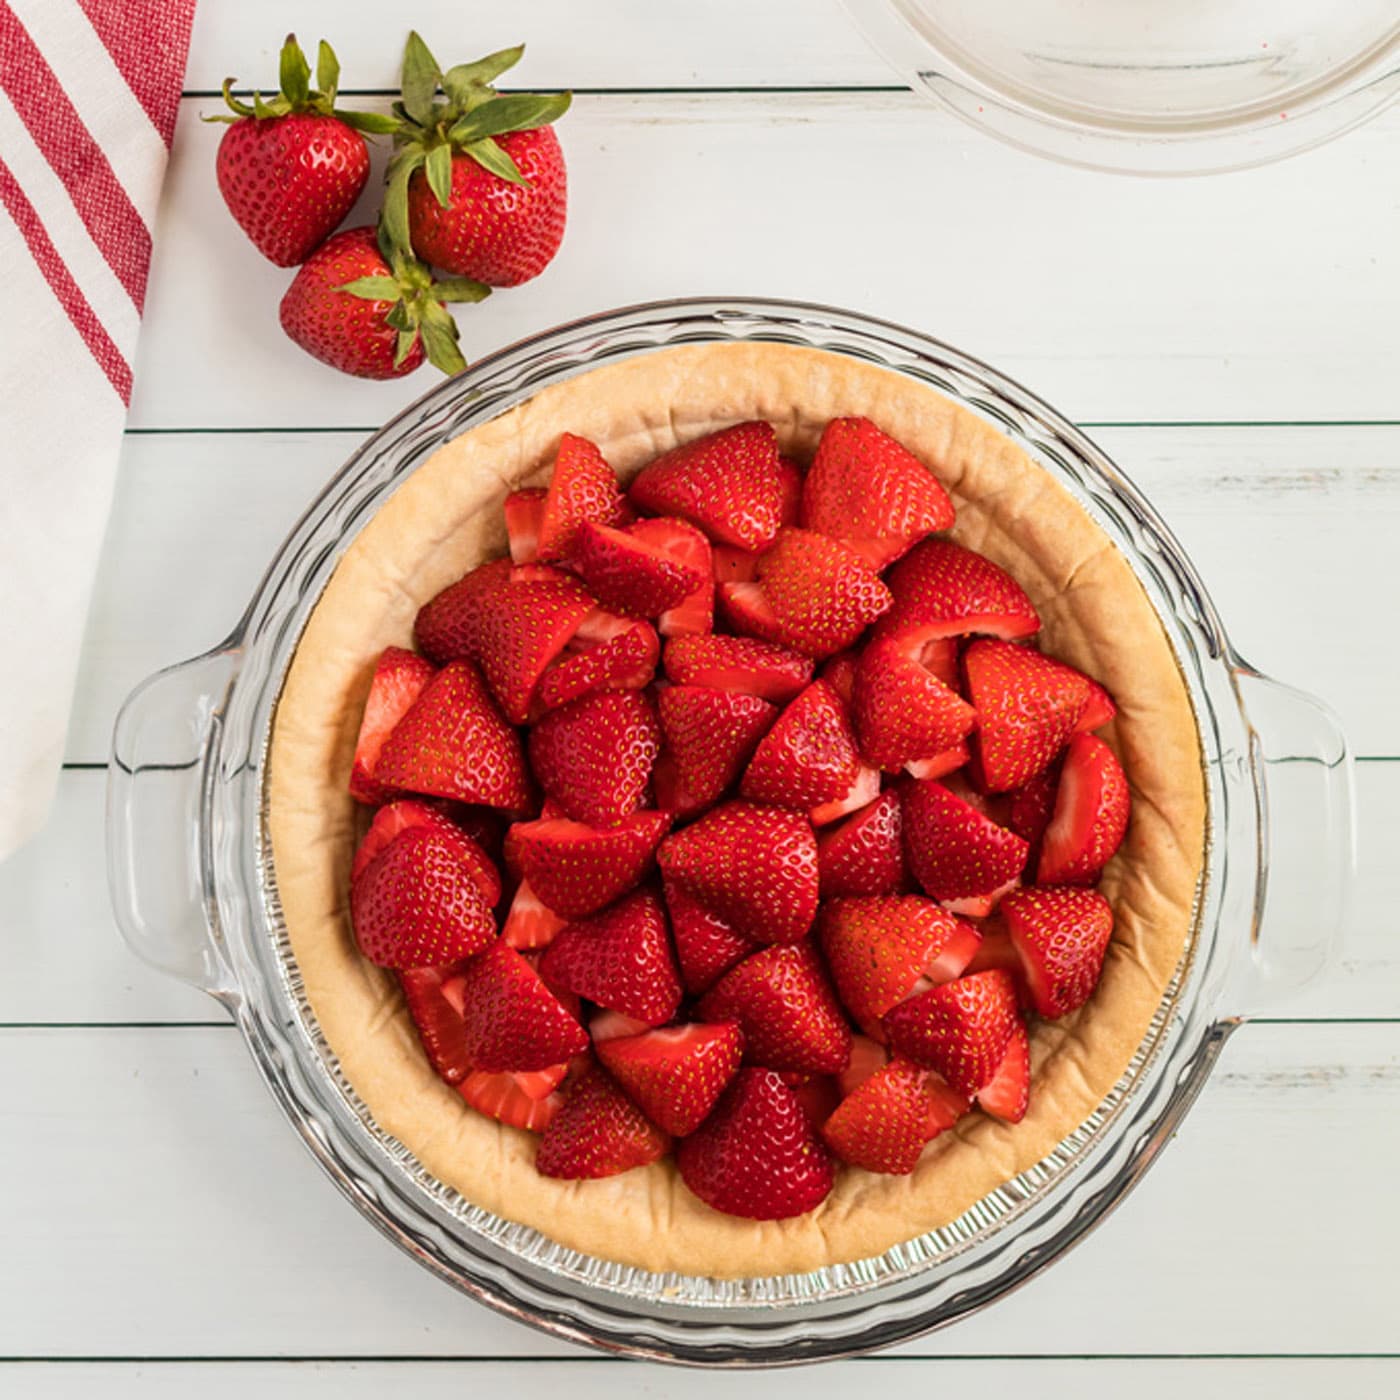 Sliced strawberries in a baked a cooled crust 